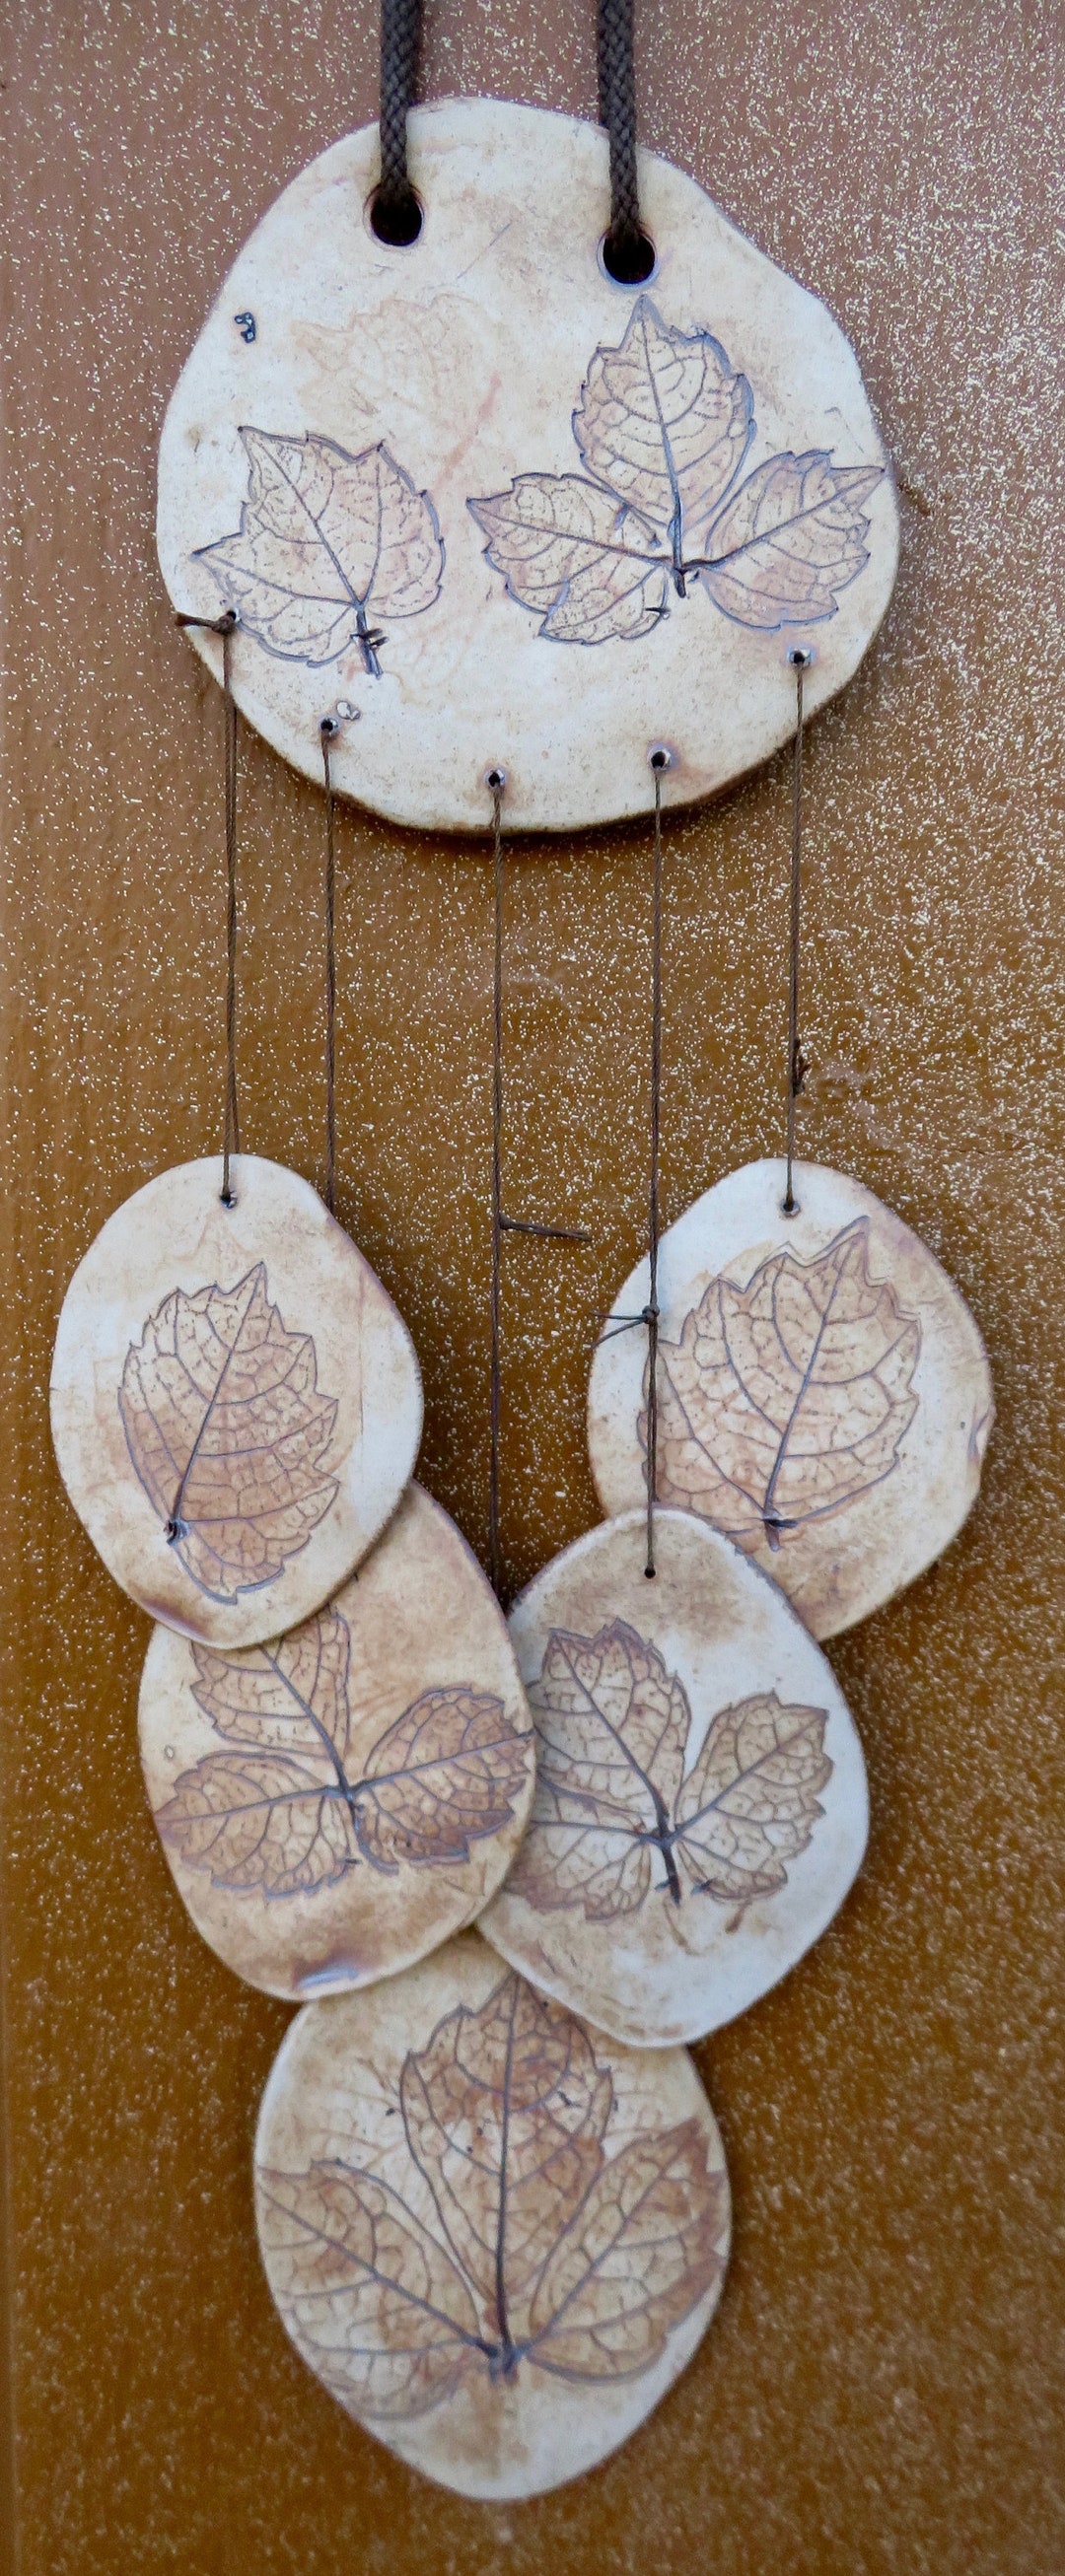 Handcrafted Porcelain Wind Chime, Green Honey Suckle With Aspen, 8  Suspended Pieces, Hanging Cord, Real Botanicals Used to Make Impressions 